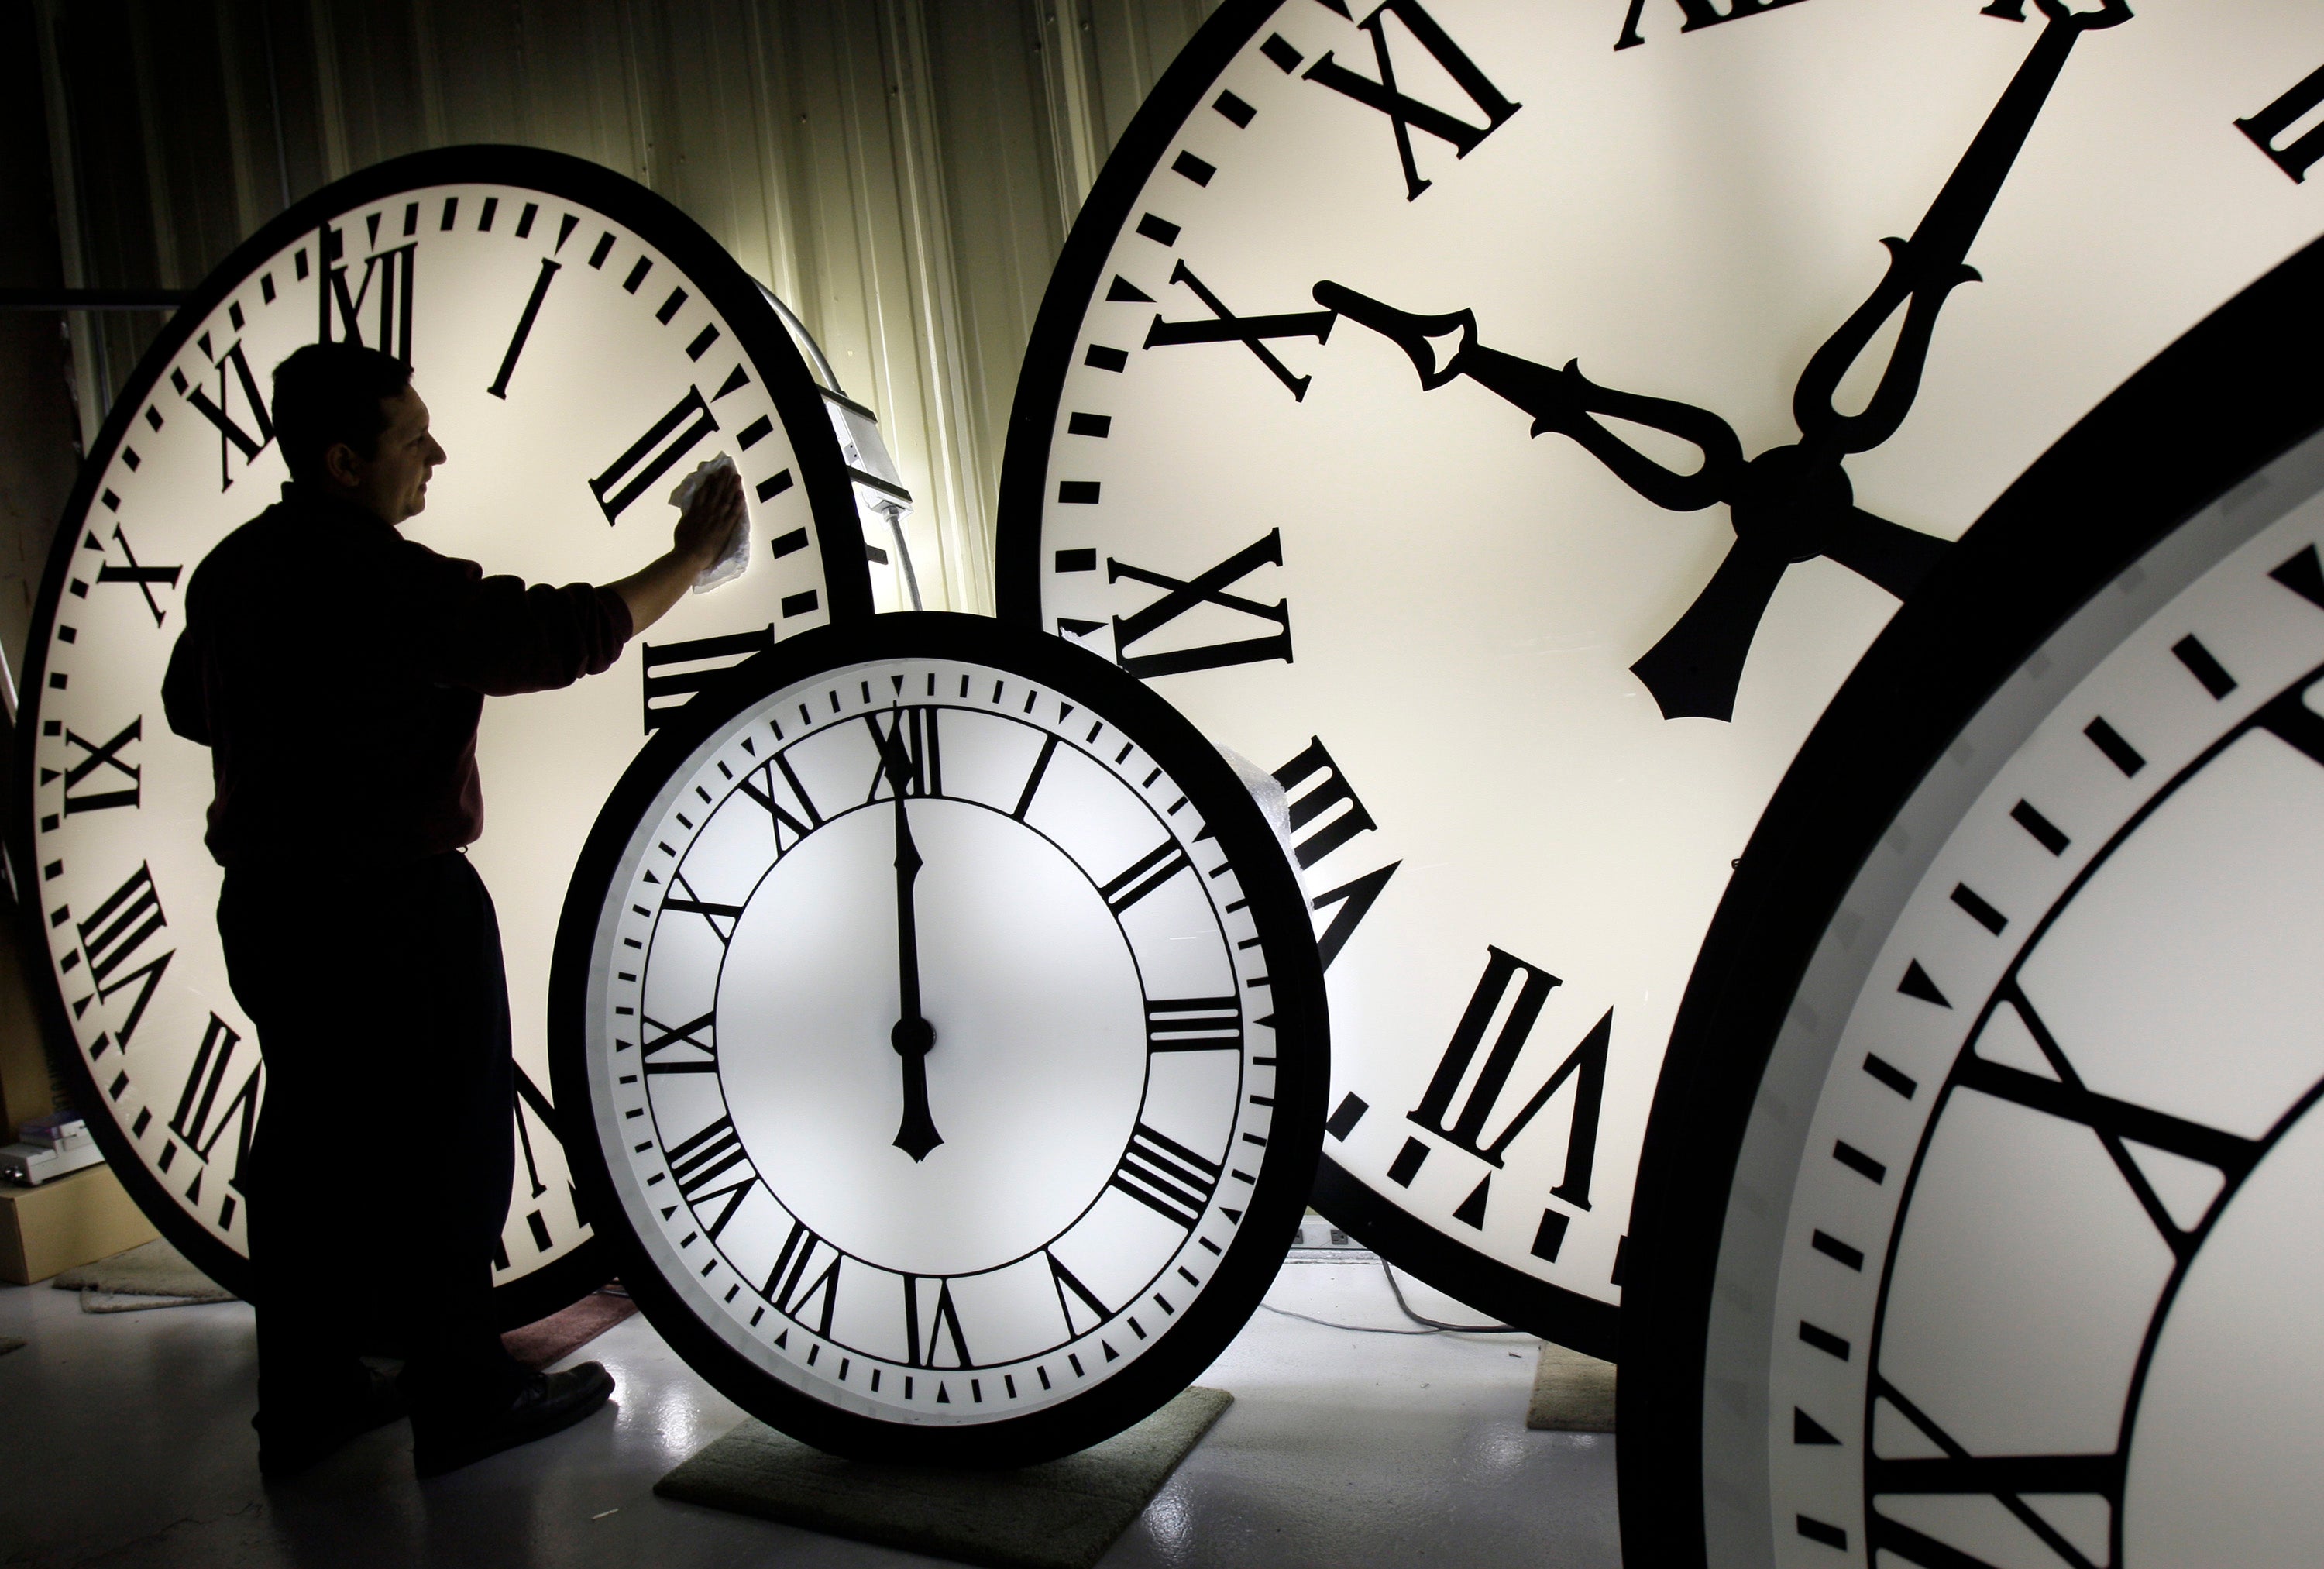 Springing forward – which is what the clocks do this weekend...